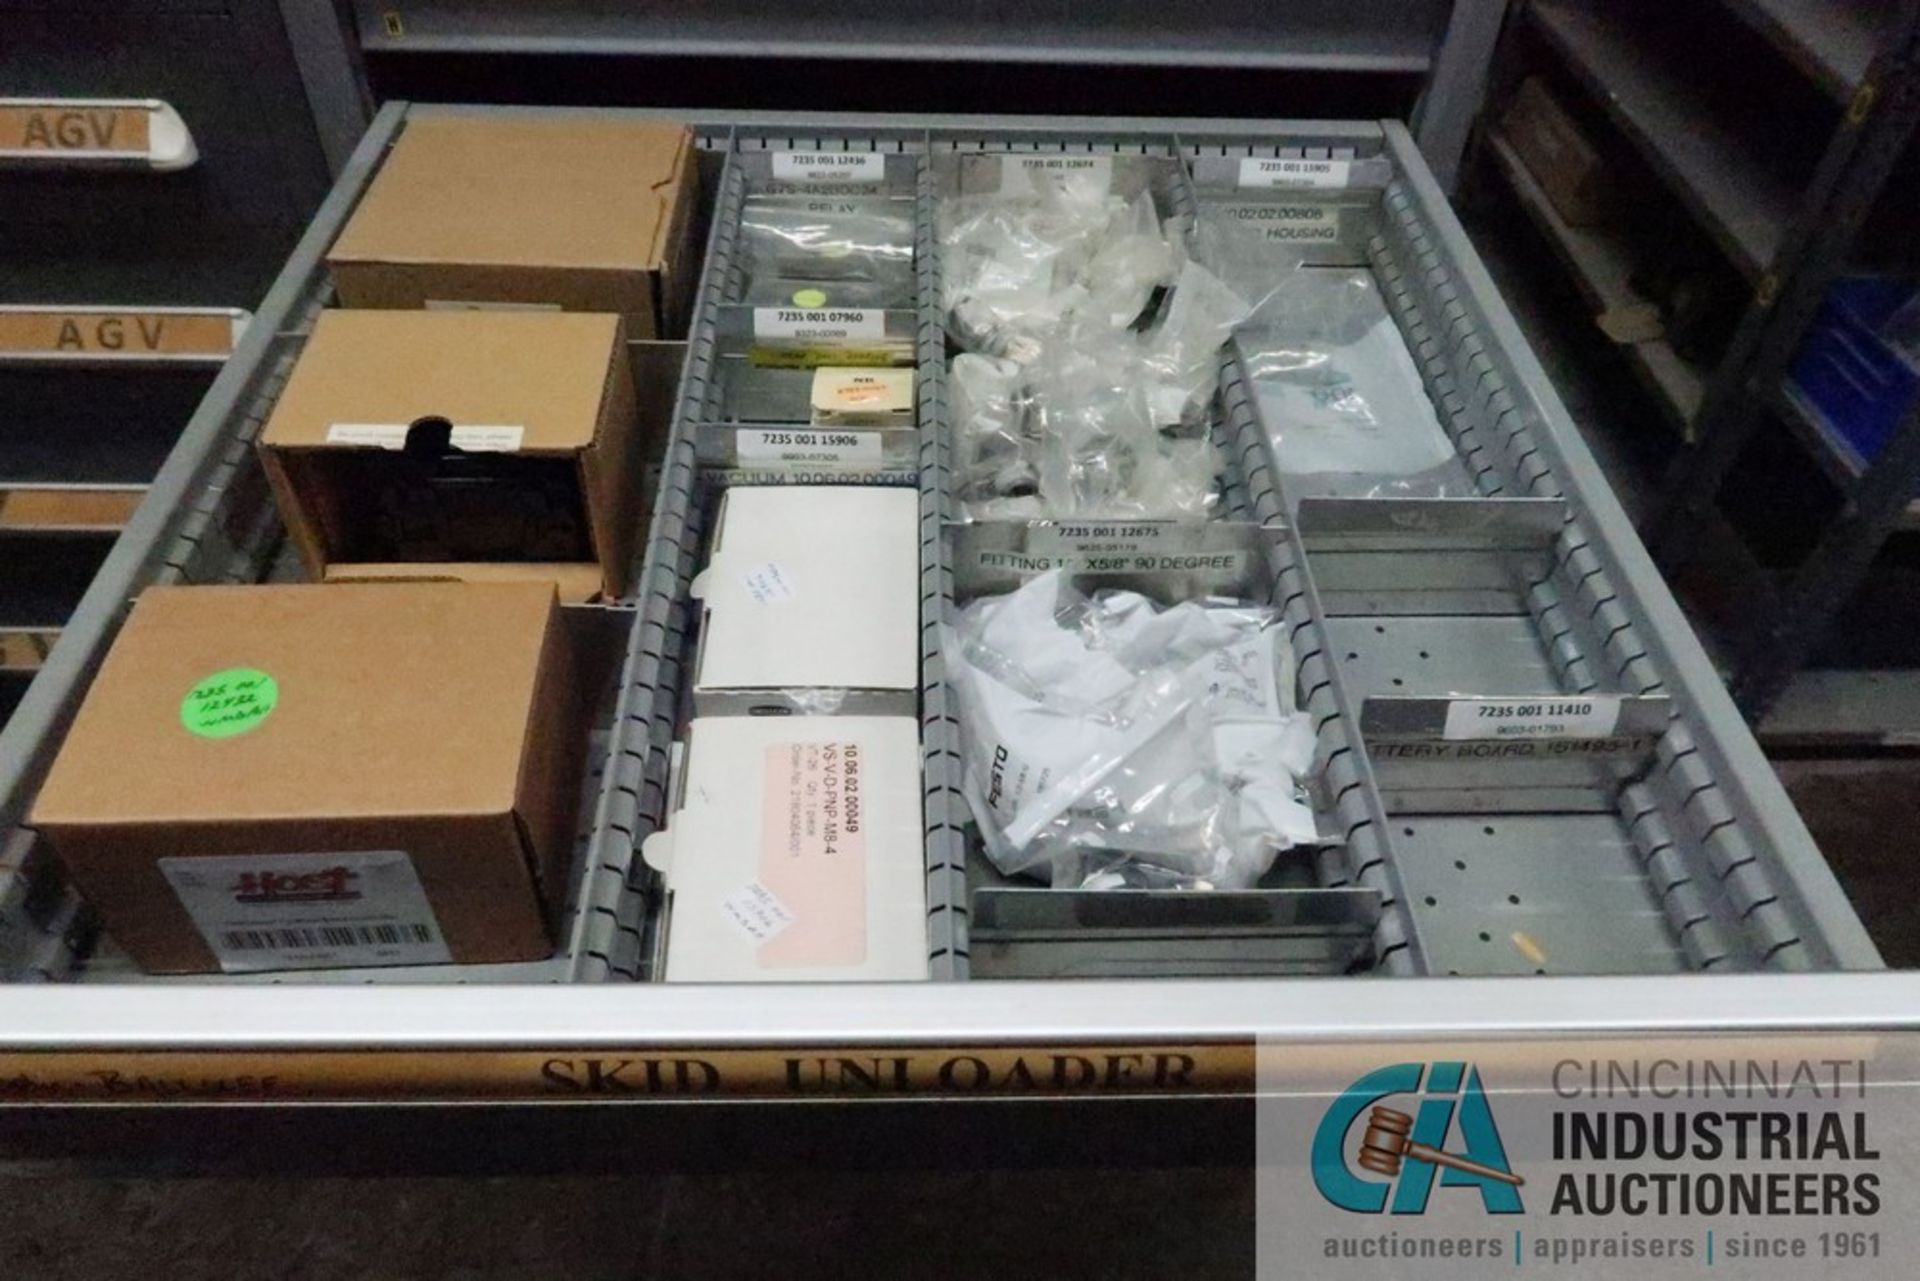 11-DRAWER LISTA CABINET WITH CONTENTS INCLUDING MISCELLANEOUS SKID UNLOADER PARTS (CABINET WM) - Image 5 of 11